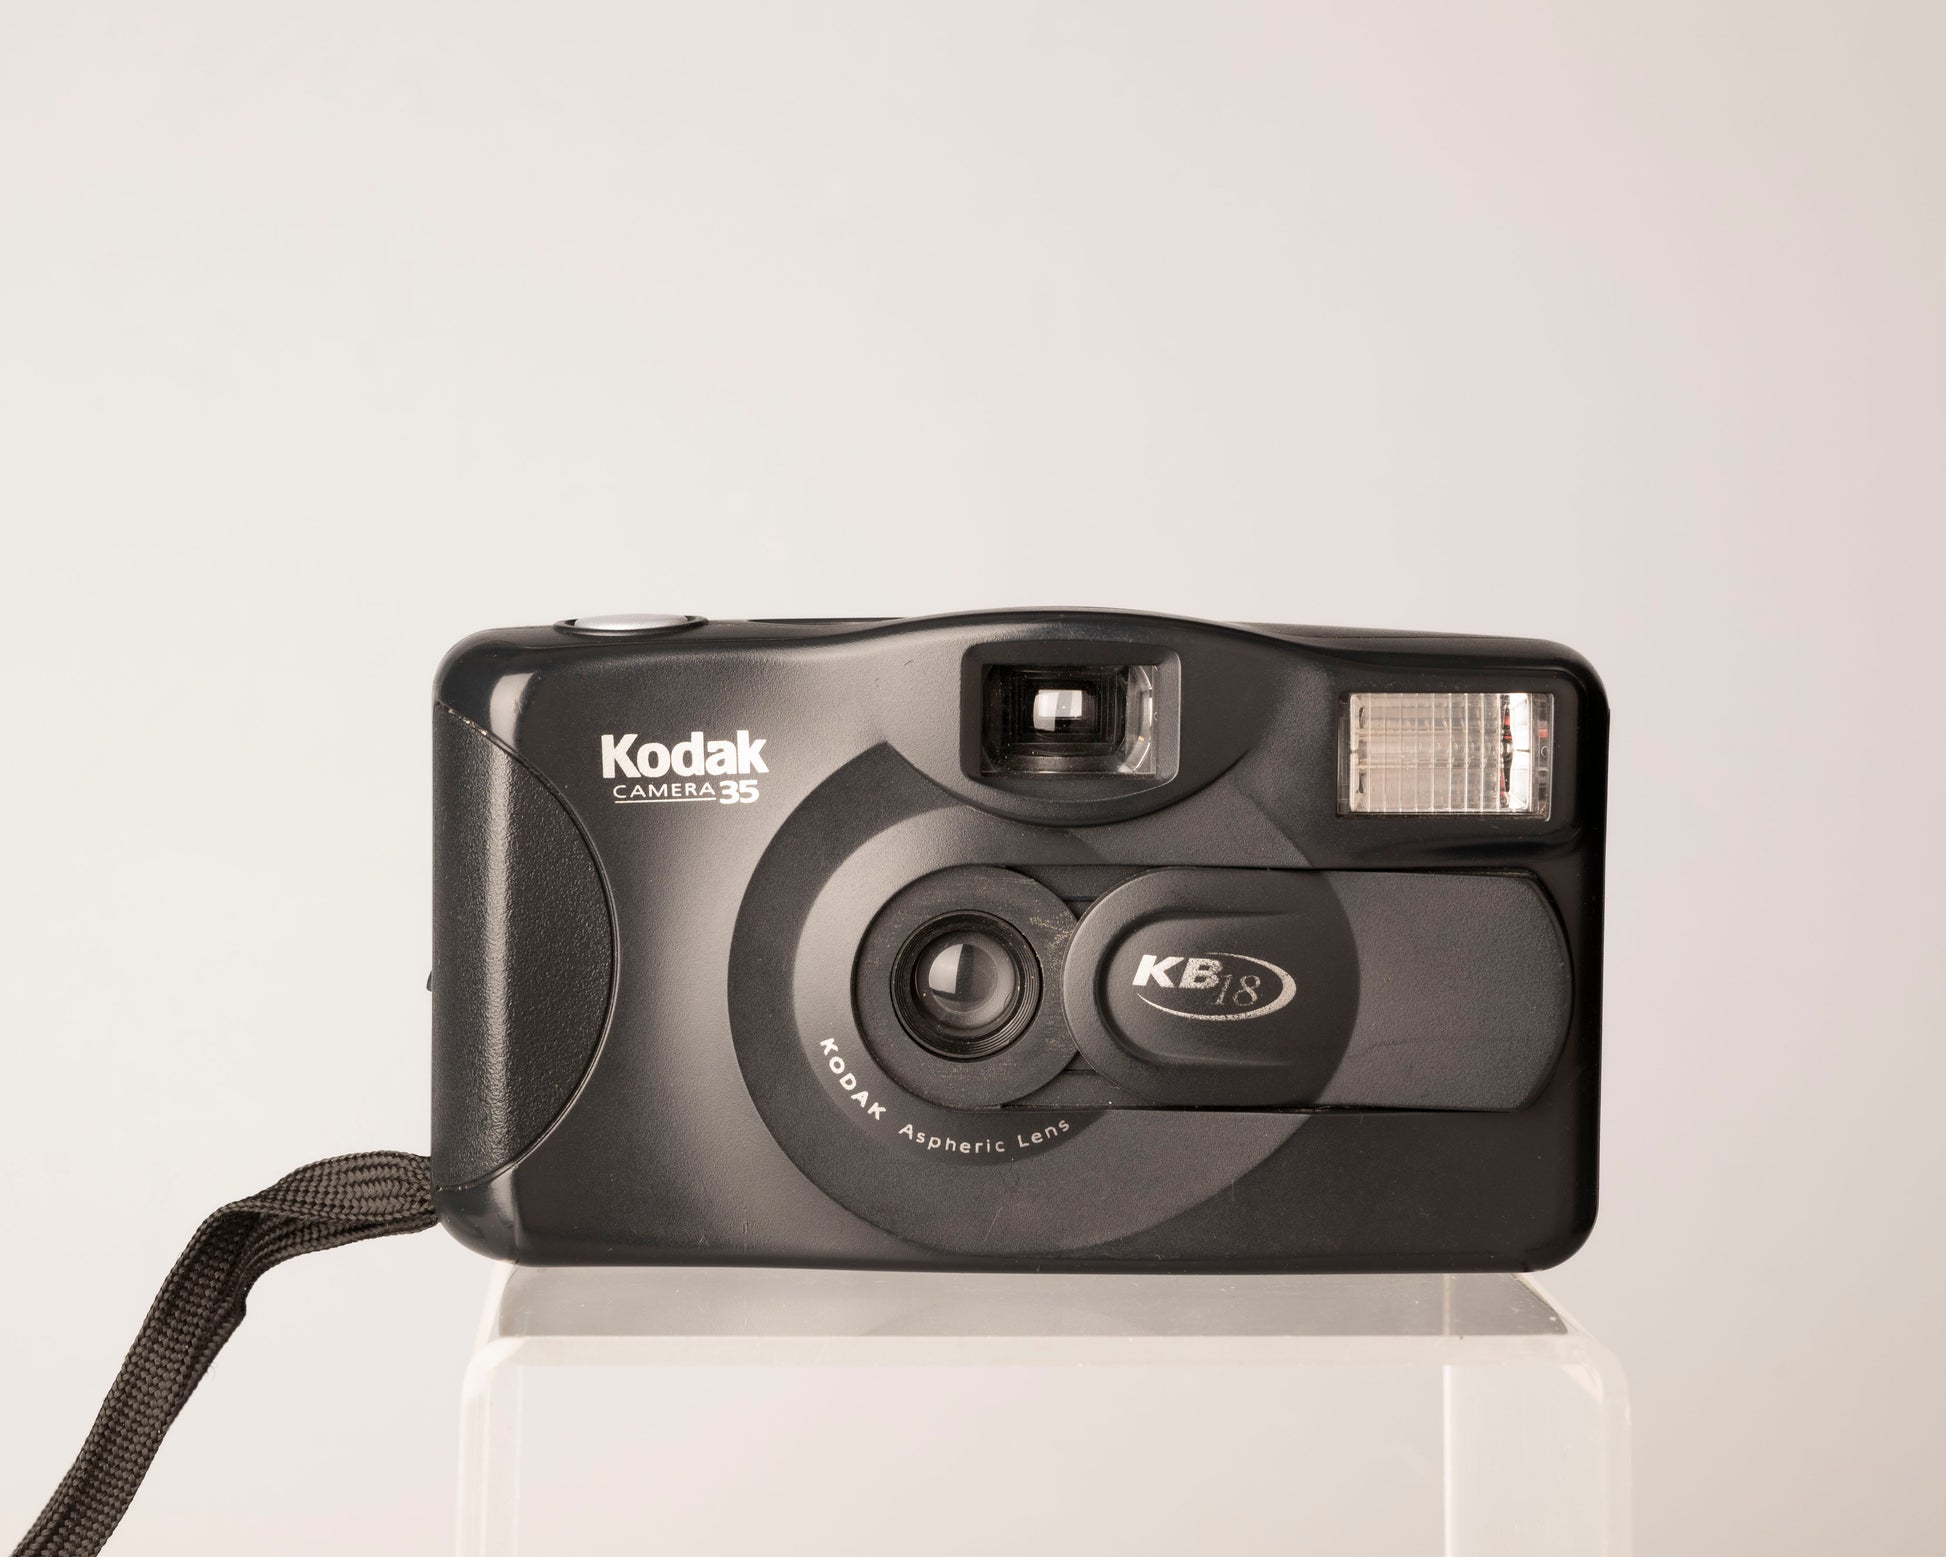 The Kodak KB18 is a simple mechanical 35mm film camera from the 1990s